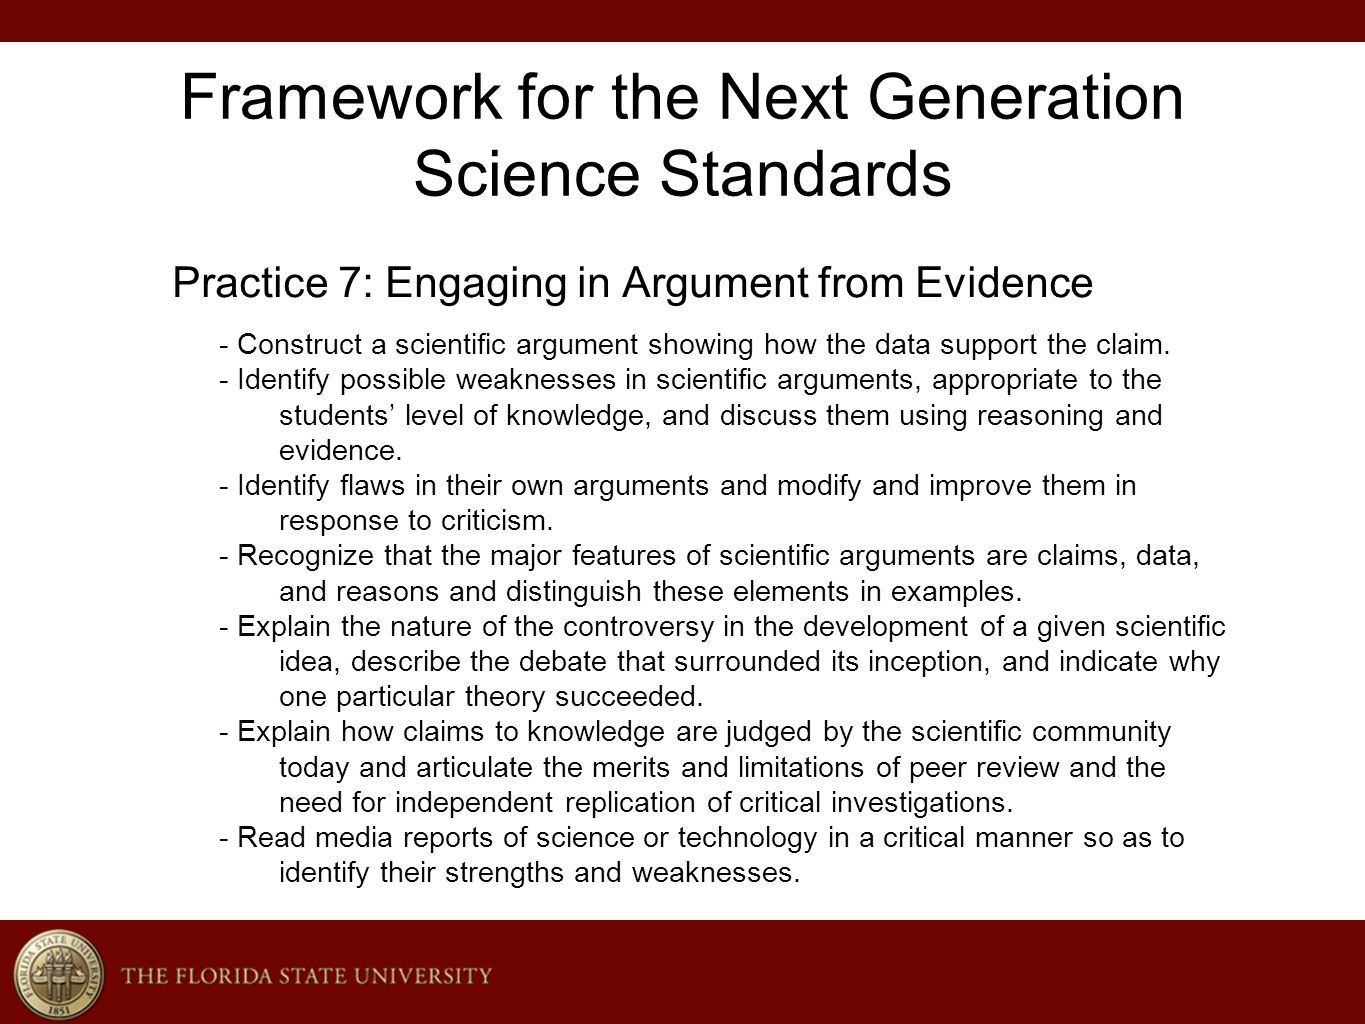 Framework for the Next Generation Science Standards Practice 7: Engaging in Argument from Evidence - Construct a scientific argument showing how the data support the claim.